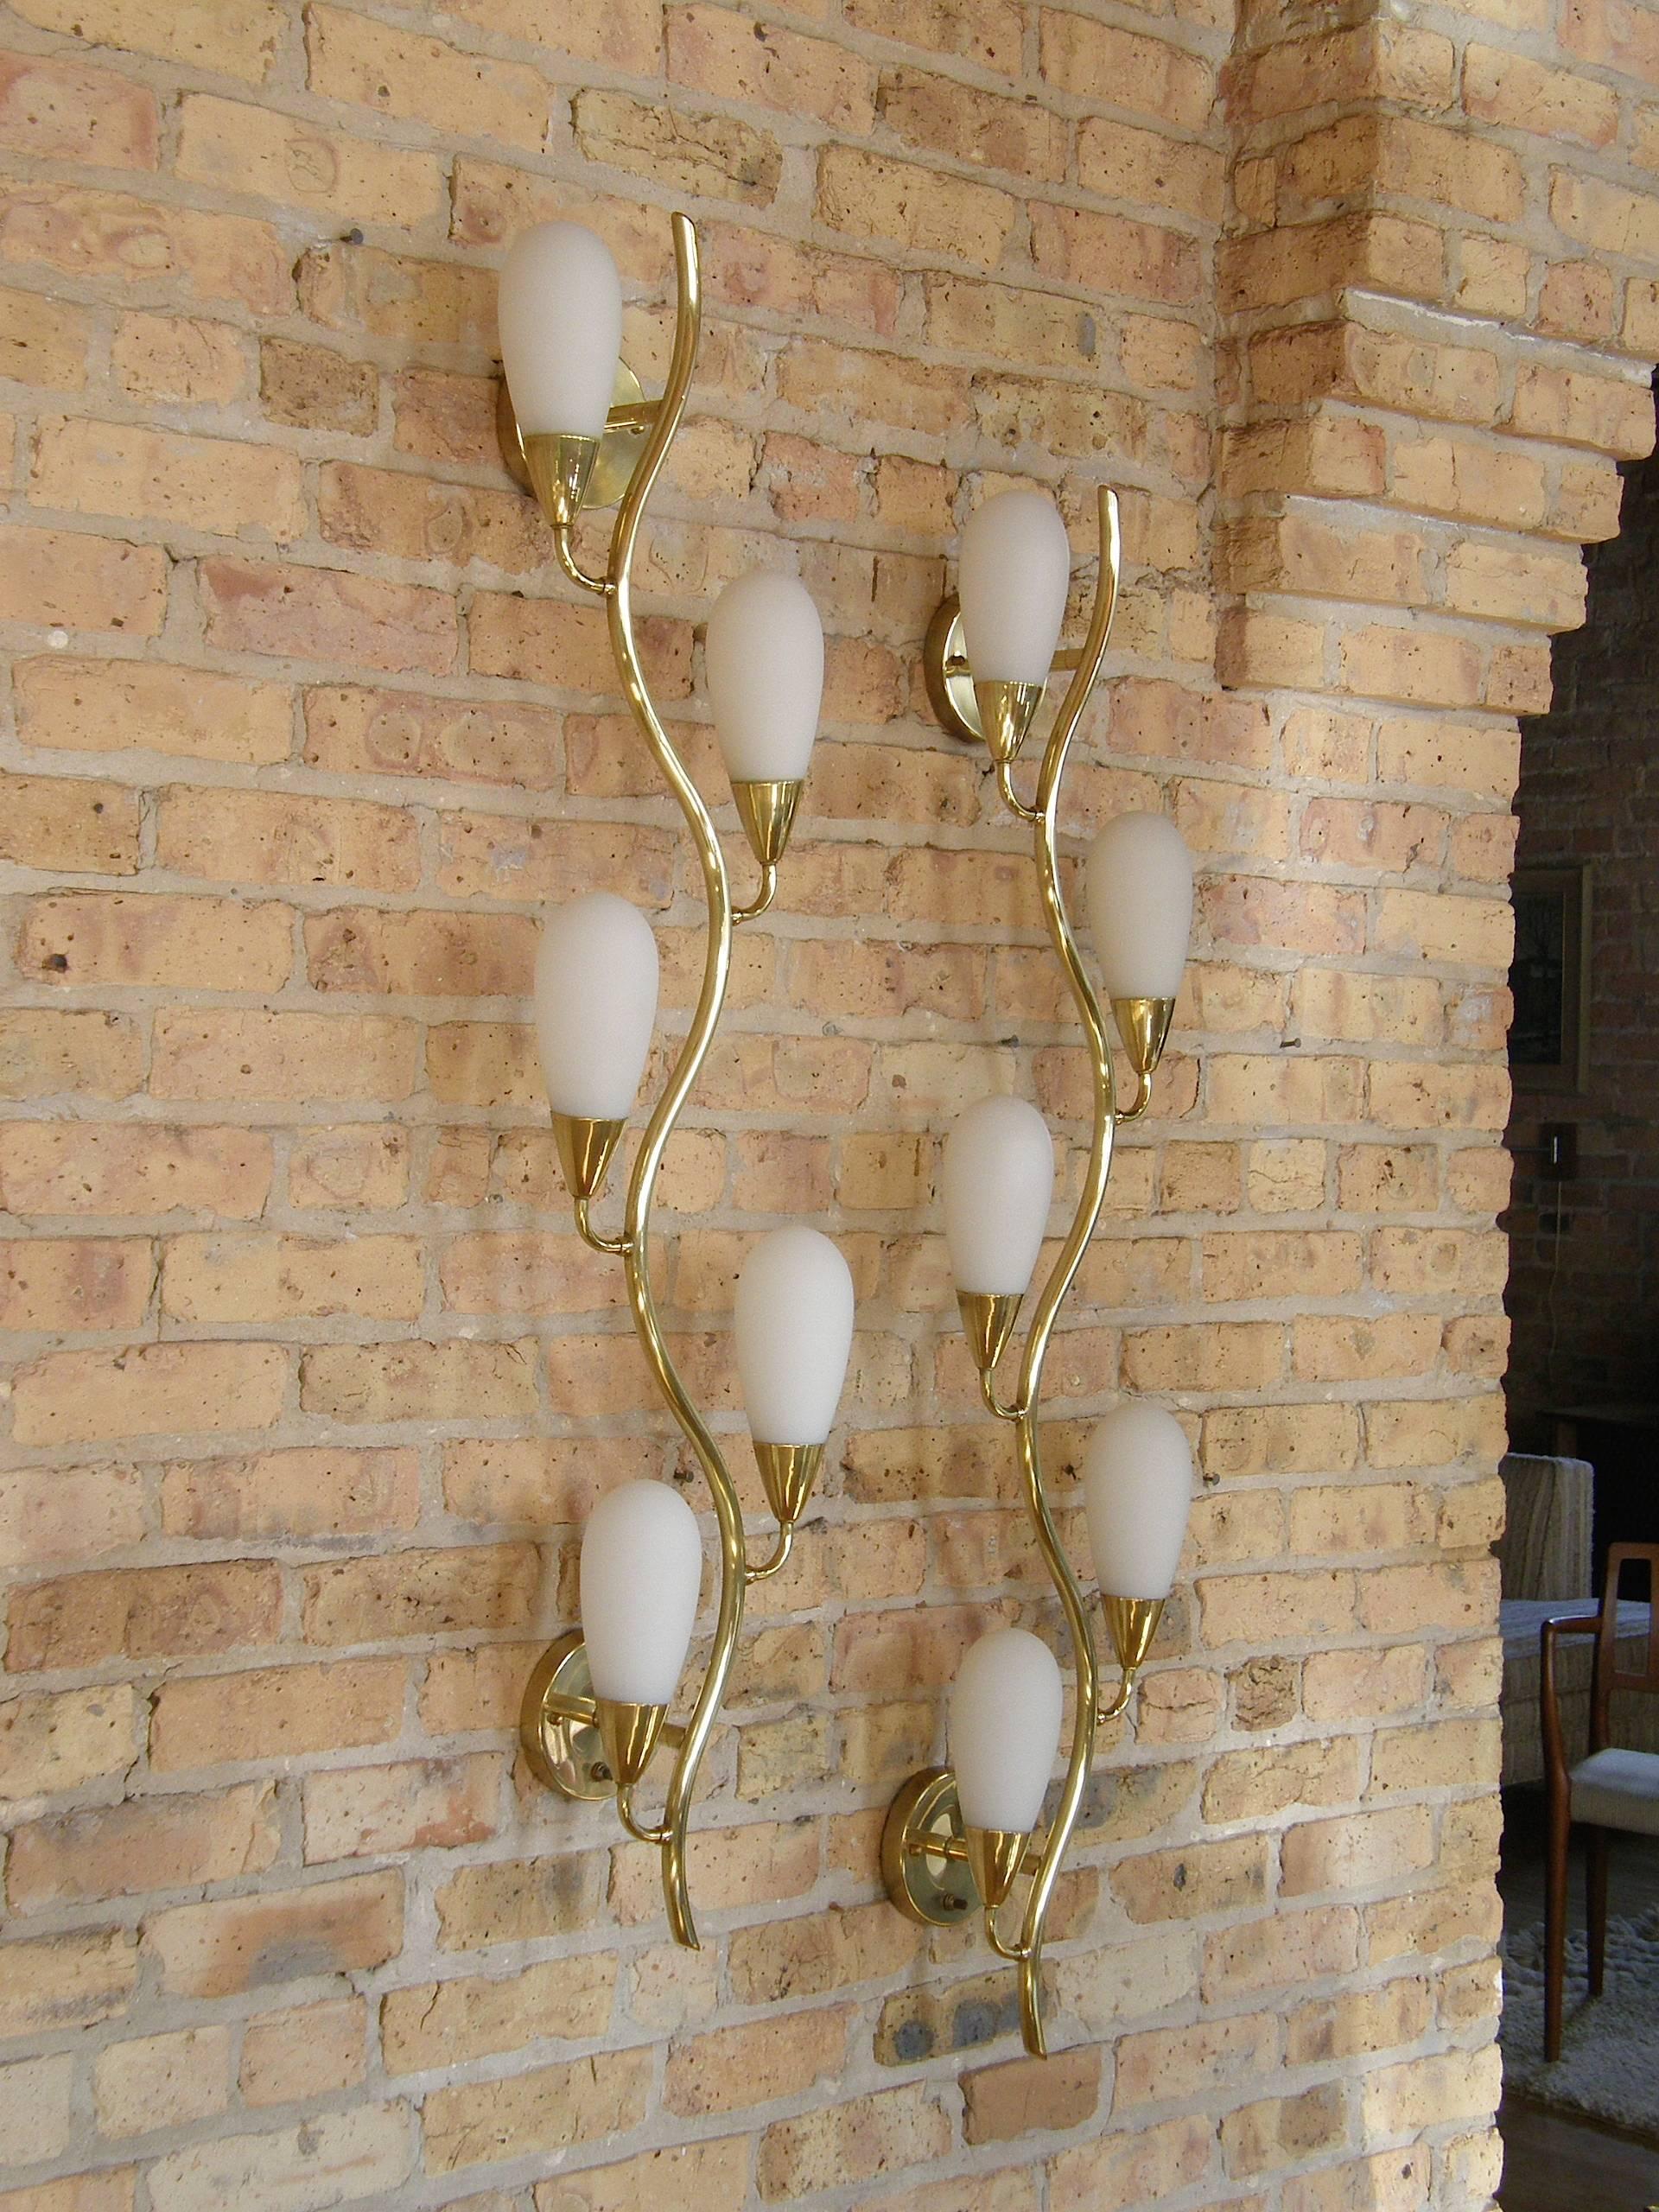 These sculptural brass, vine form wall sconces have undulating stems that branch off on alternating sides to hold pod shaped frosted glass lamp shades. The design is a wonderful combination of elegance and whimsy.

Lightbulbs will be included with